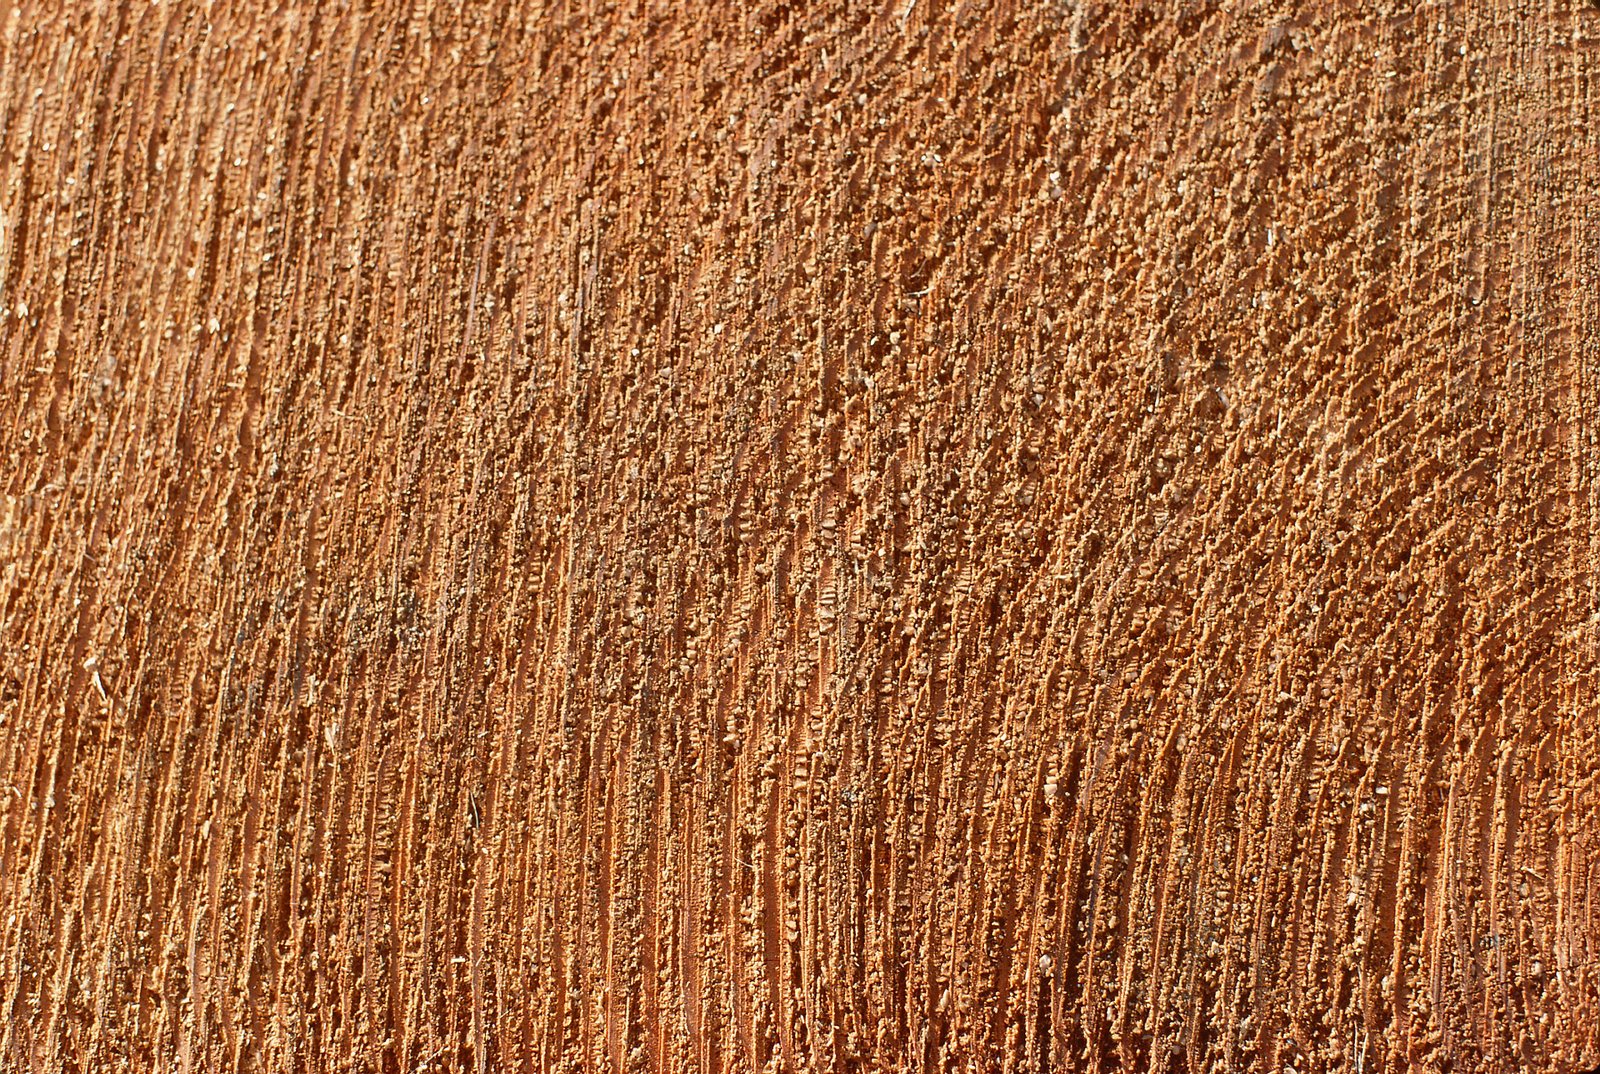 a close up image of wood grain showing the grainy material